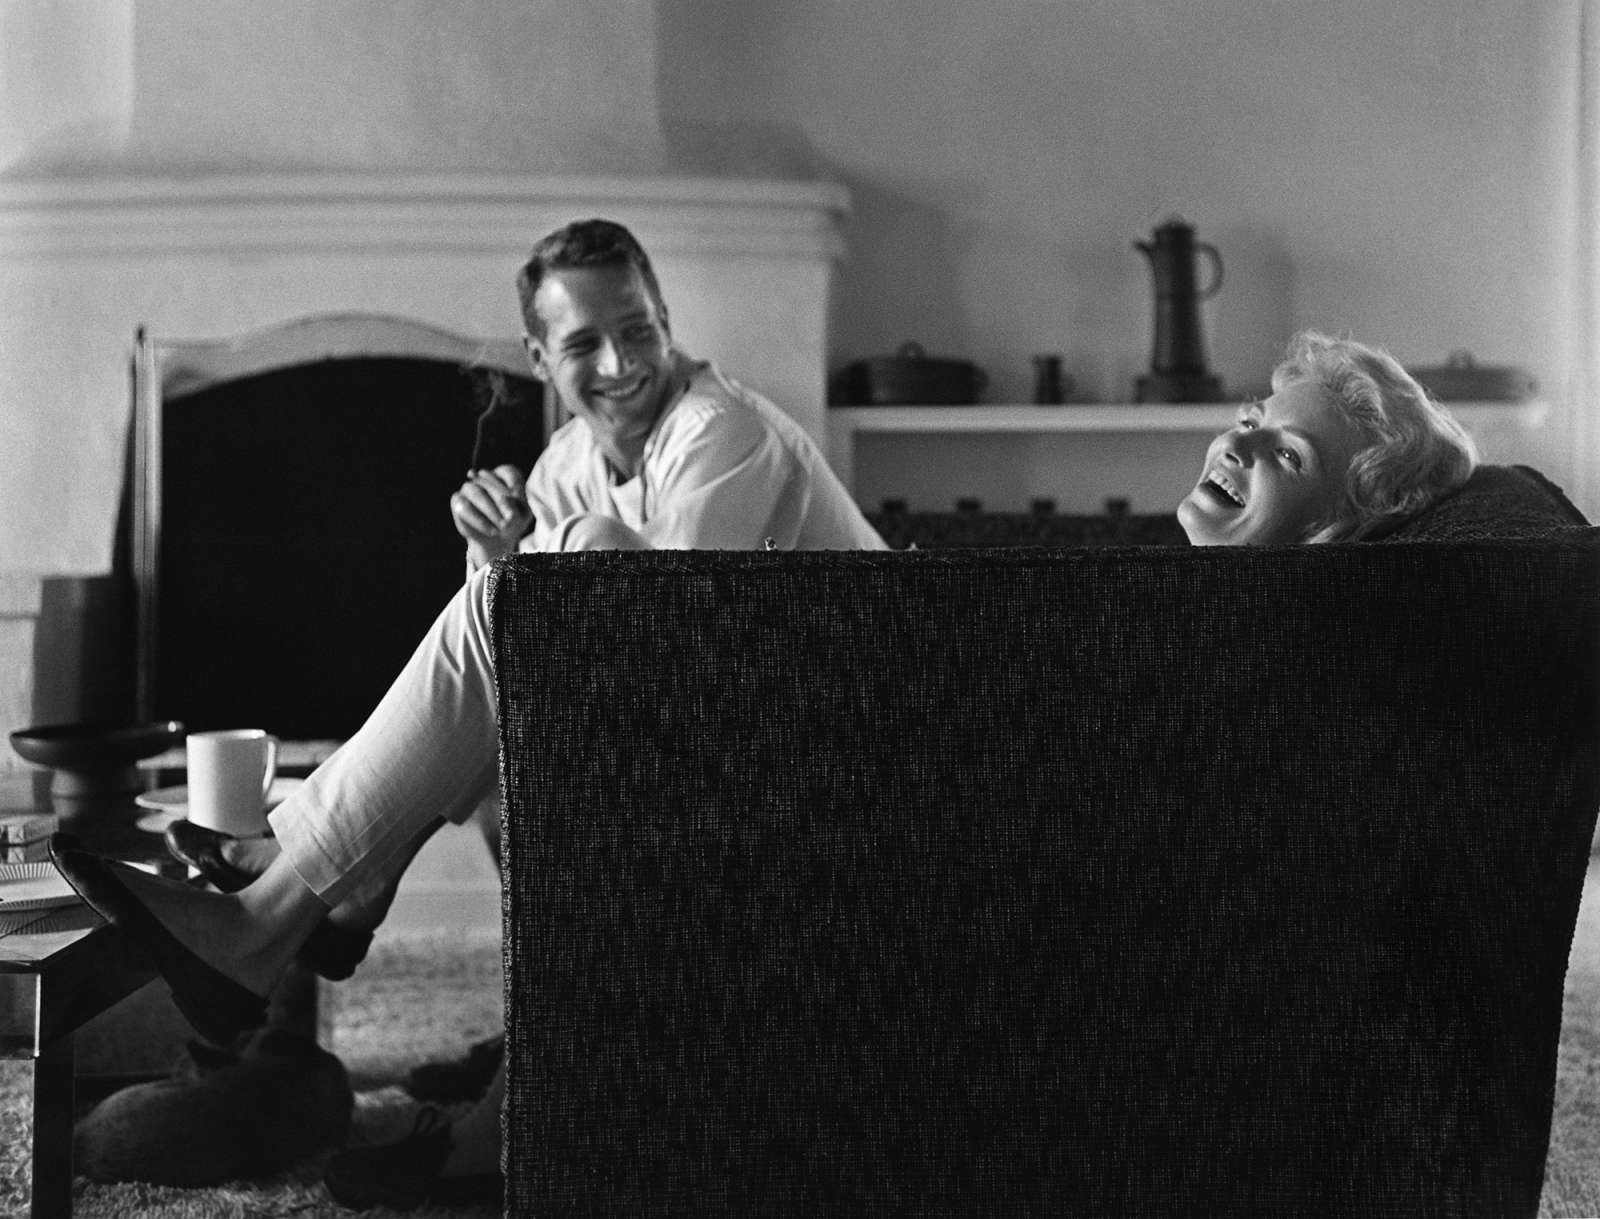 Motion Picture Television Archive, Sid Avery: Domestic Bliss: Newman and Woodward at Their Beverly Hills Home, 1958